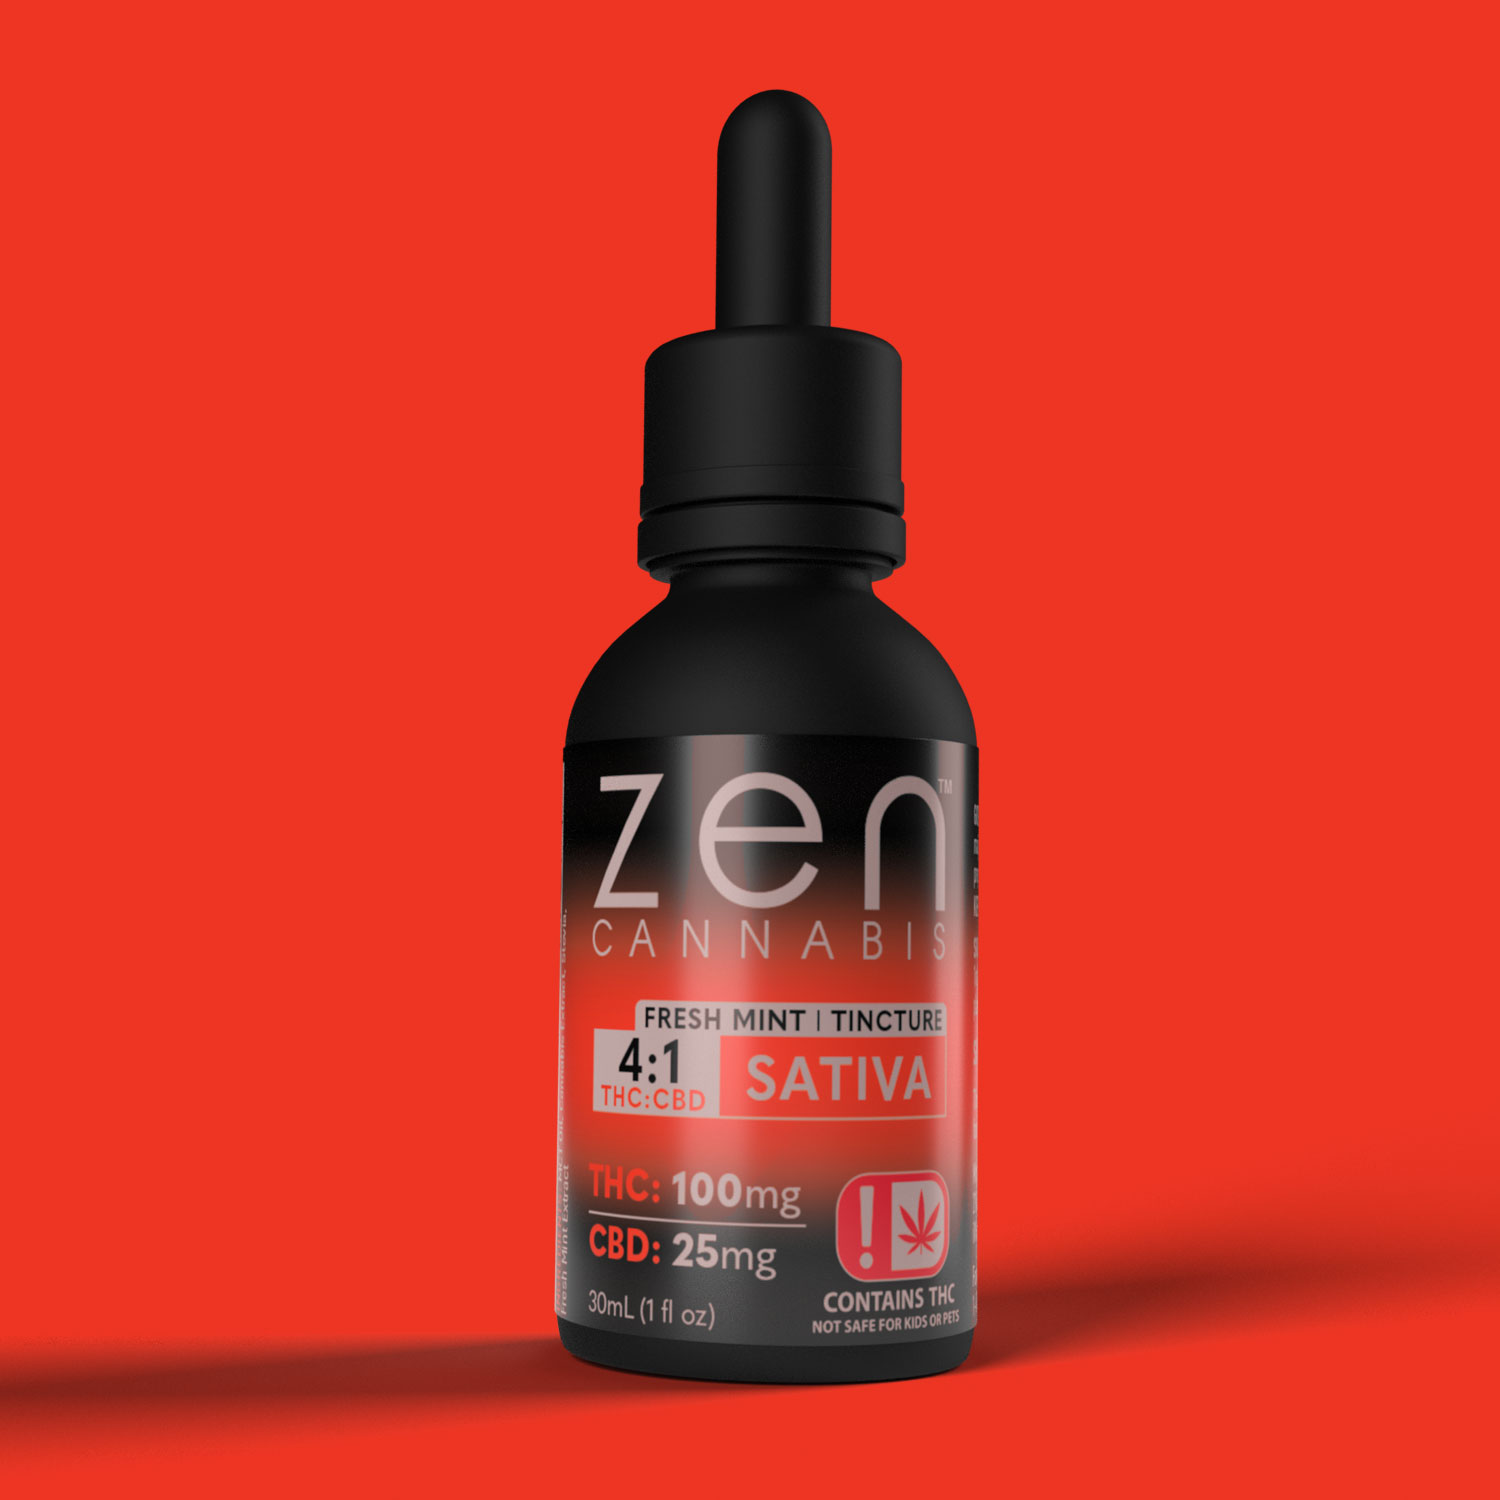 FRESH MINT
100mg THC per bottle
25mg CBD per bottle
Bursting with fresh mint flavor, the Zen Cannabis Sativa tincture provides the incredible benefits of both THC, CBD and terpenes to give you an uplifting and rejuvenating experience without dragging you down.

100mg THC | 25mg CBD
1oz (30ml)